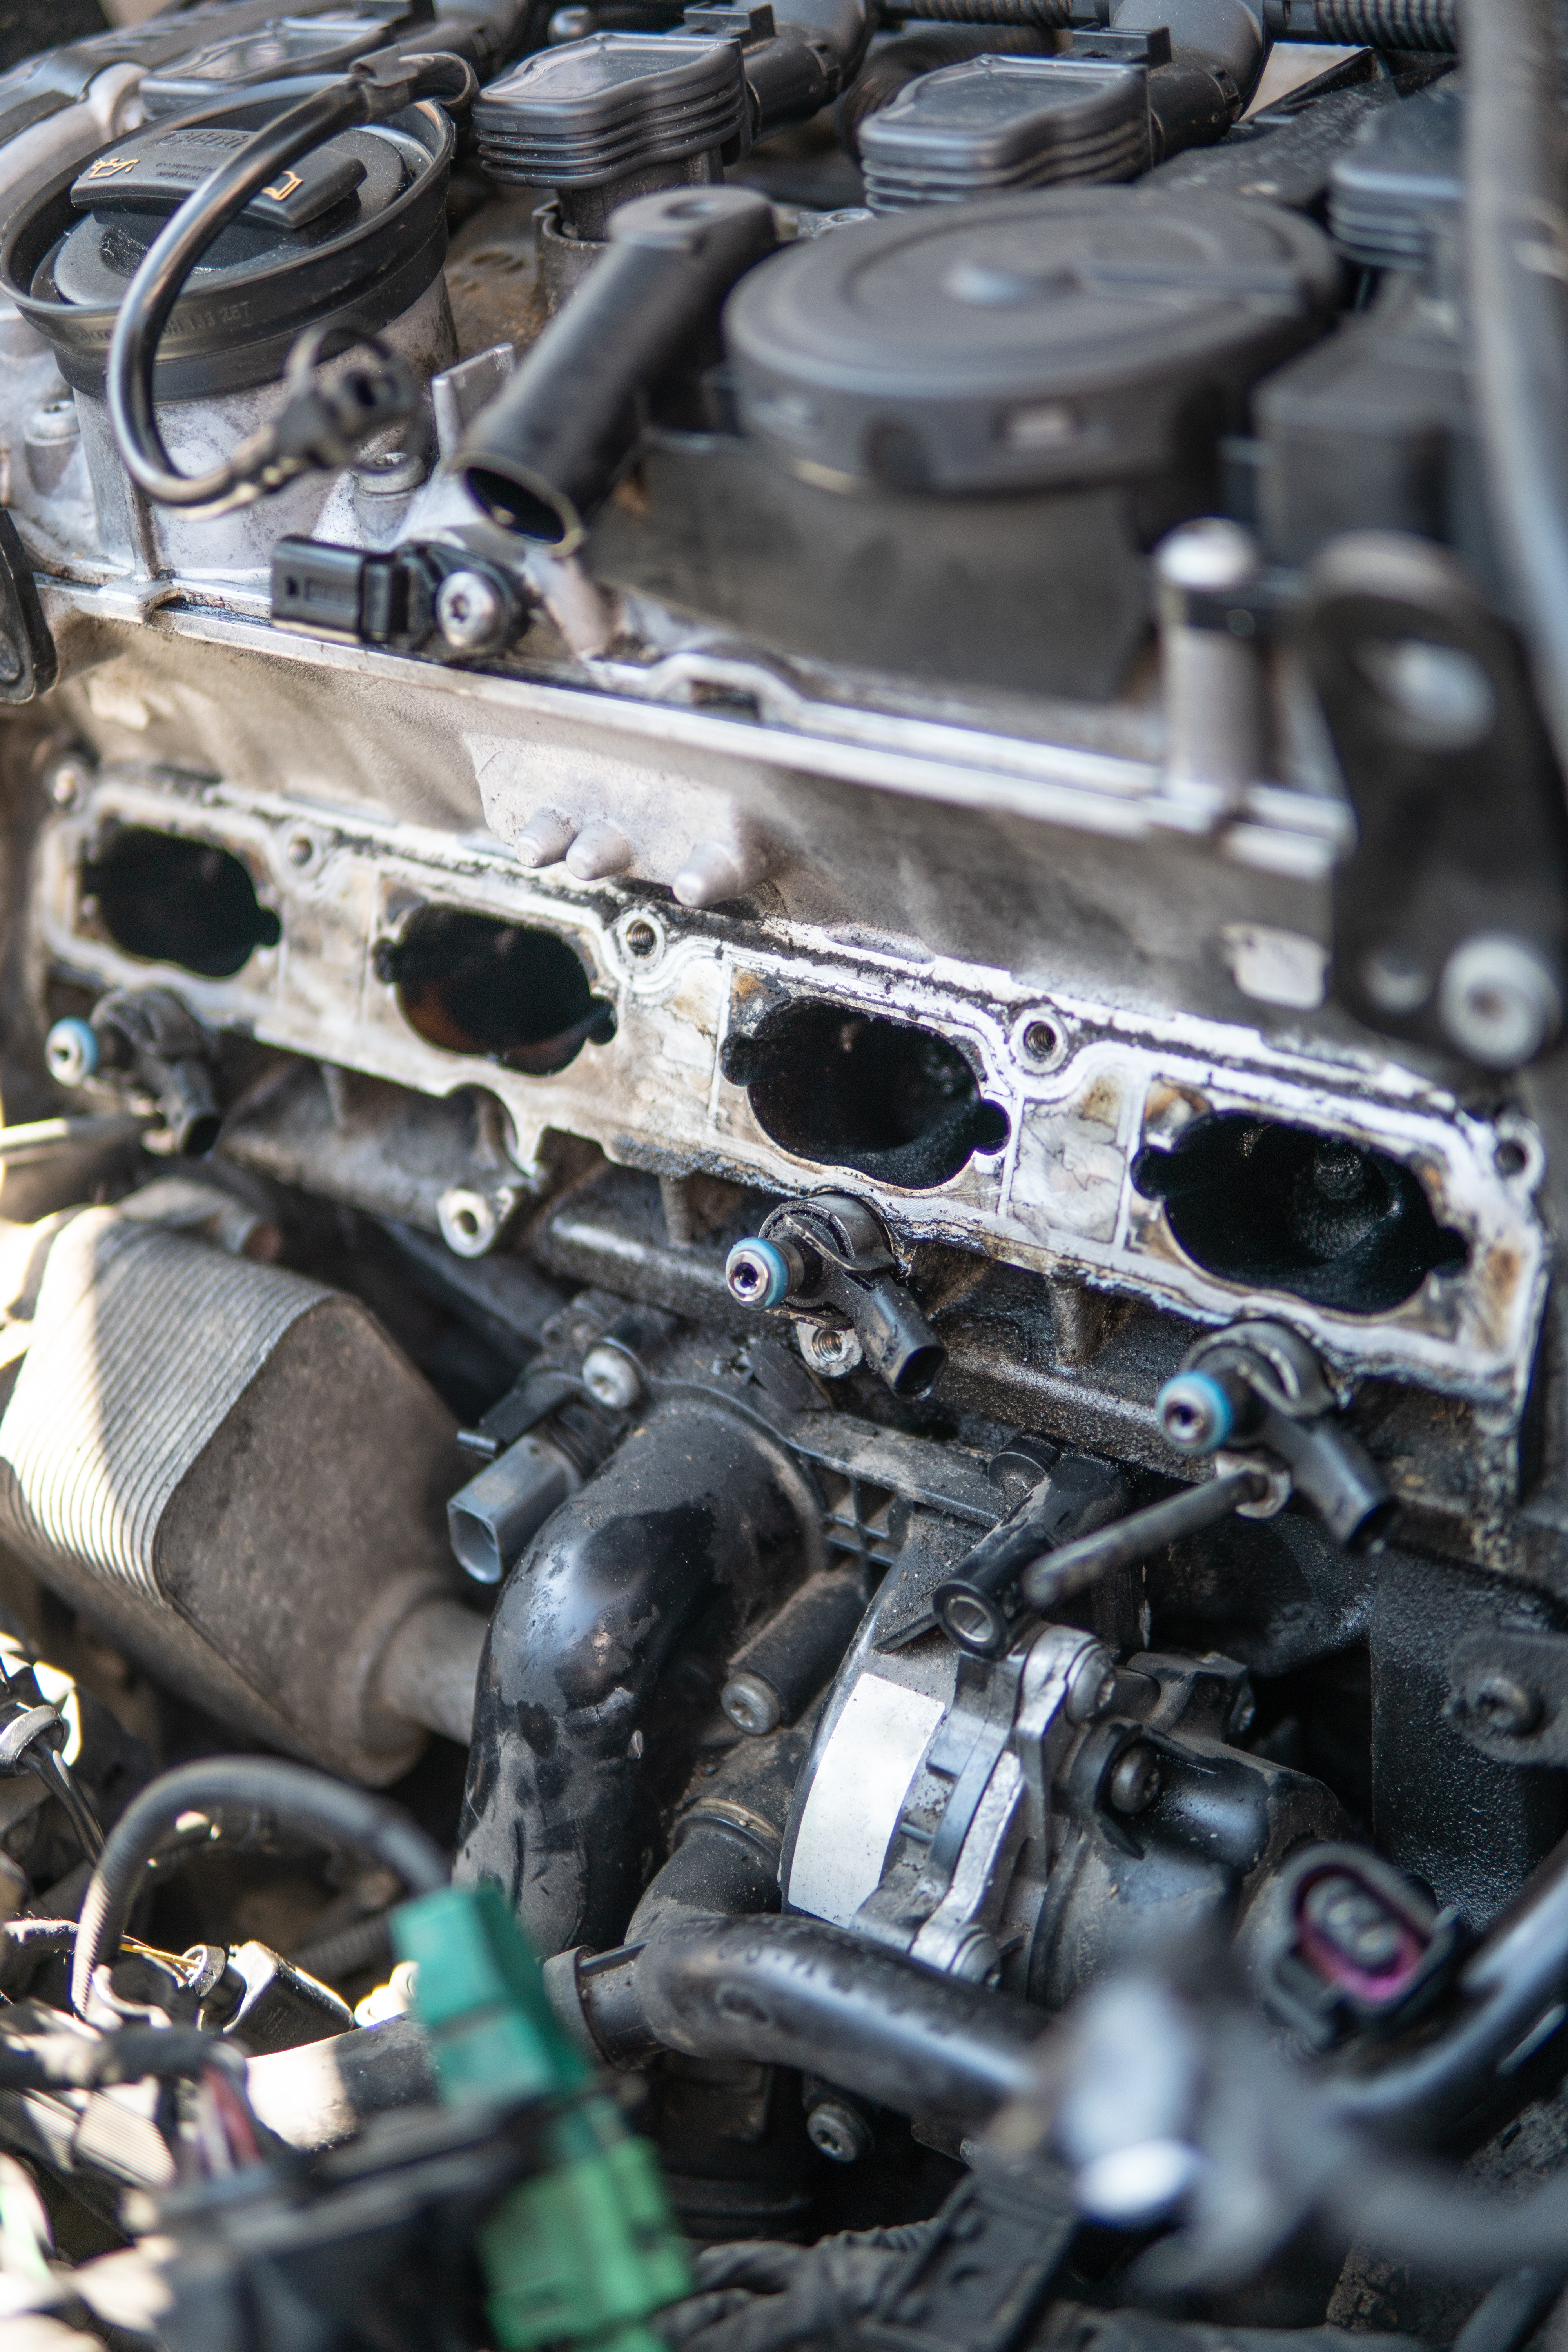 An image of a dirty intake manifold but DPF Alternatives can help with our expert intake manifold cleaning service in Ontario / Malheur County, OR.